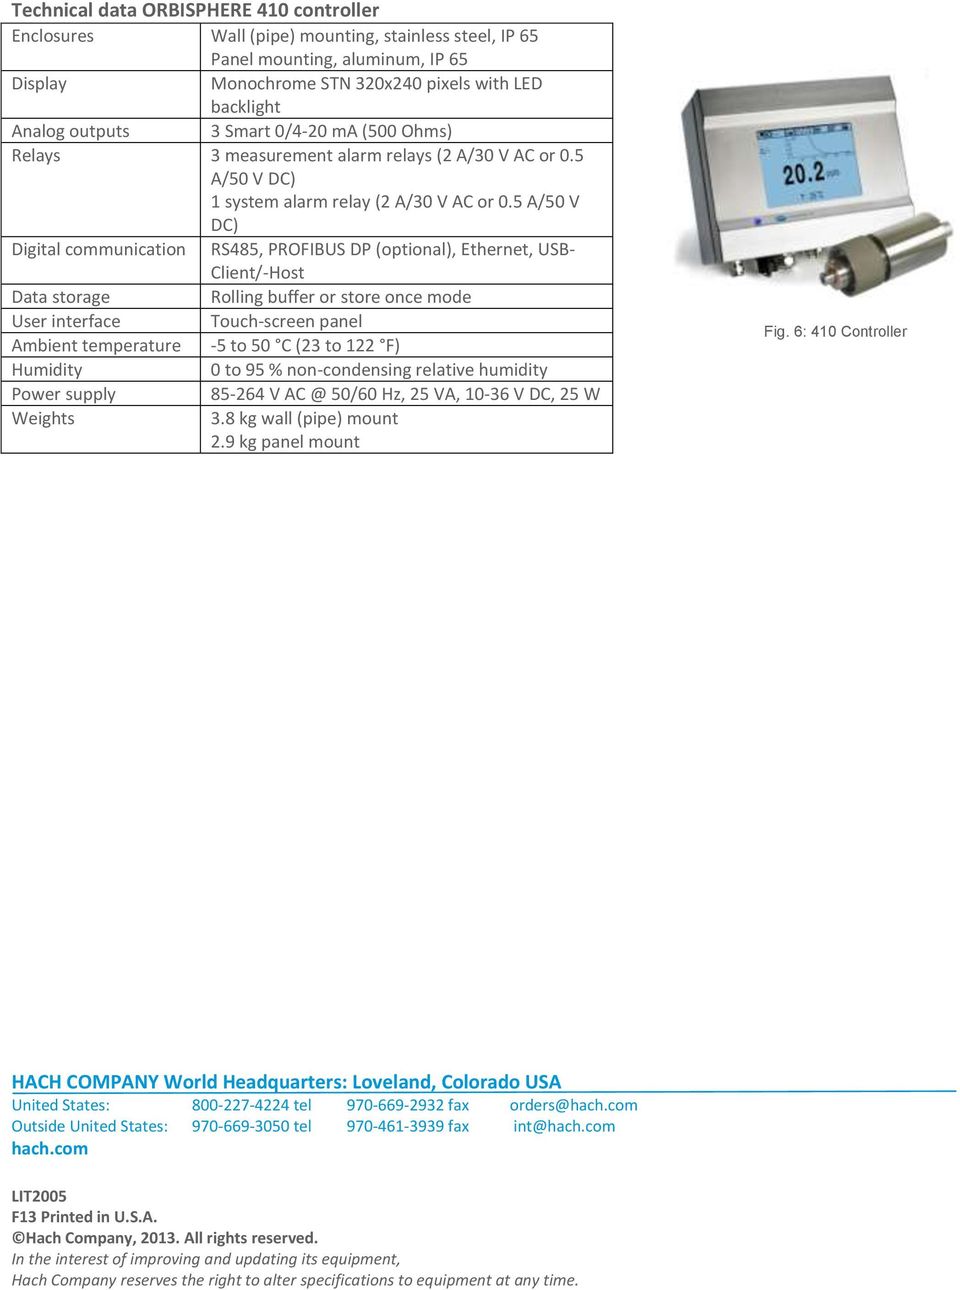 5 A/50 V DC) Digital communication RS485, PROFIBUS DP (optional), Ethernet, USB- Client/-Host Data storage Rolling buffer or store once mode User interface Touch-screen panel Ambient temperature -5